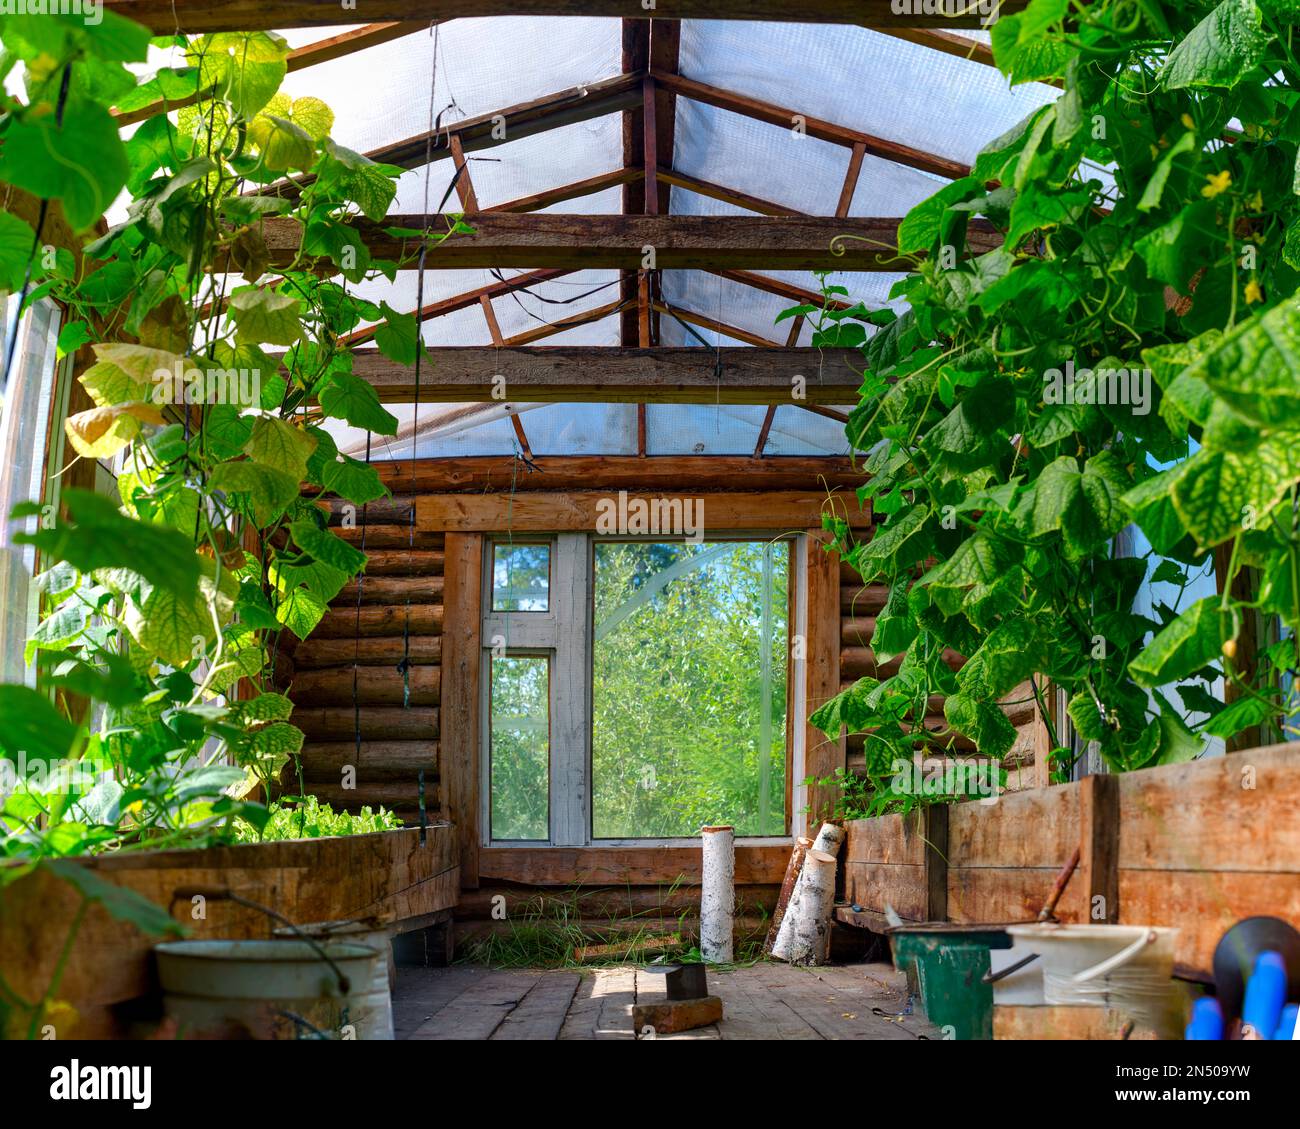 The wooden heated Northern greenhouse from within in Yakutia from a wooden bar with the pots raised above the earth with plants cucumbers and Windows Stock Photo